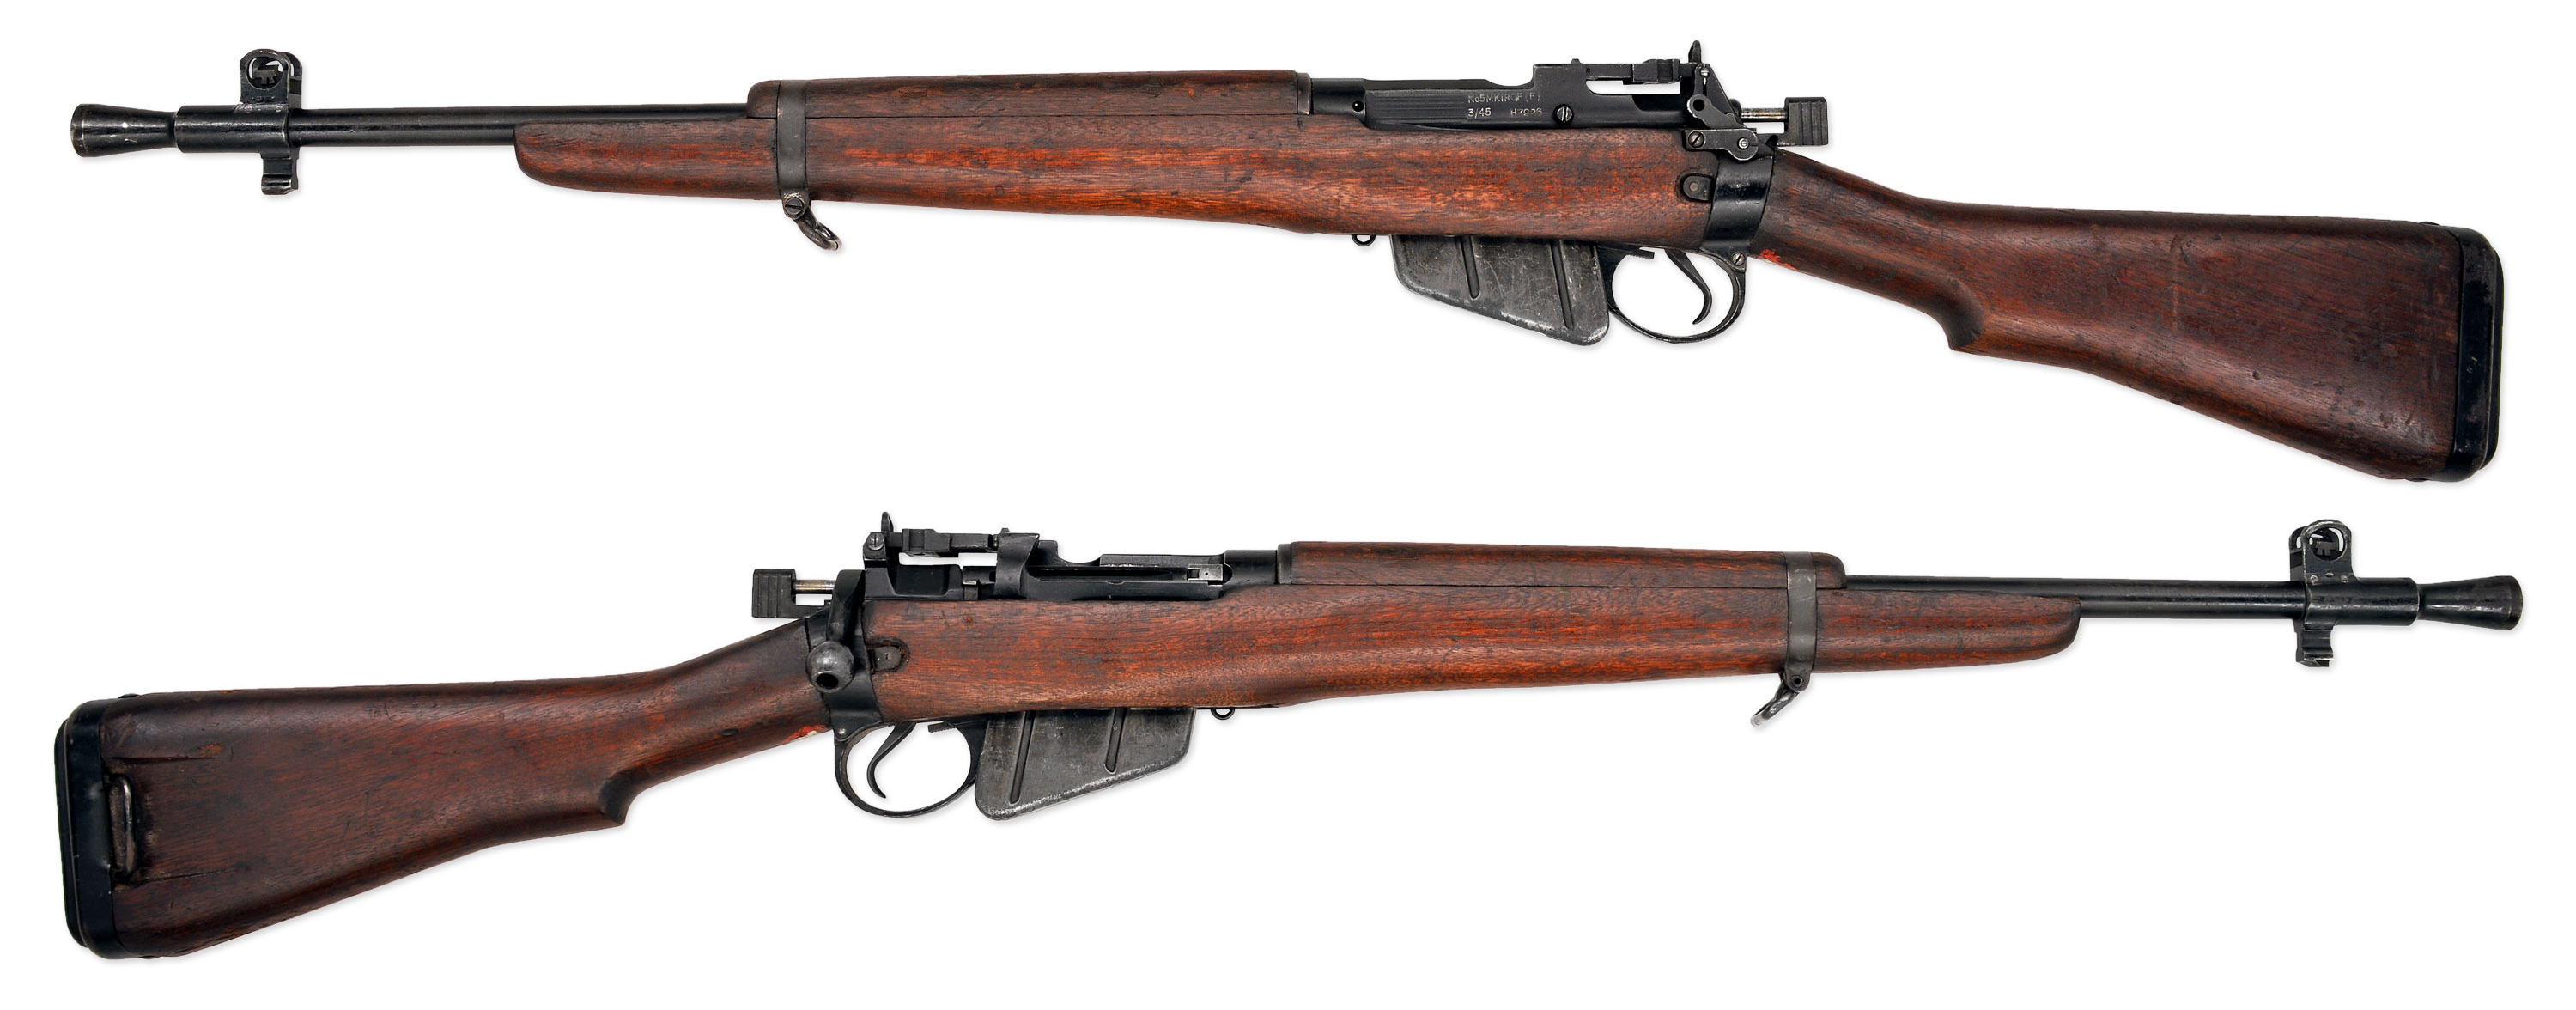 Enfield 303 British Rifle Pics, Weapons Collection